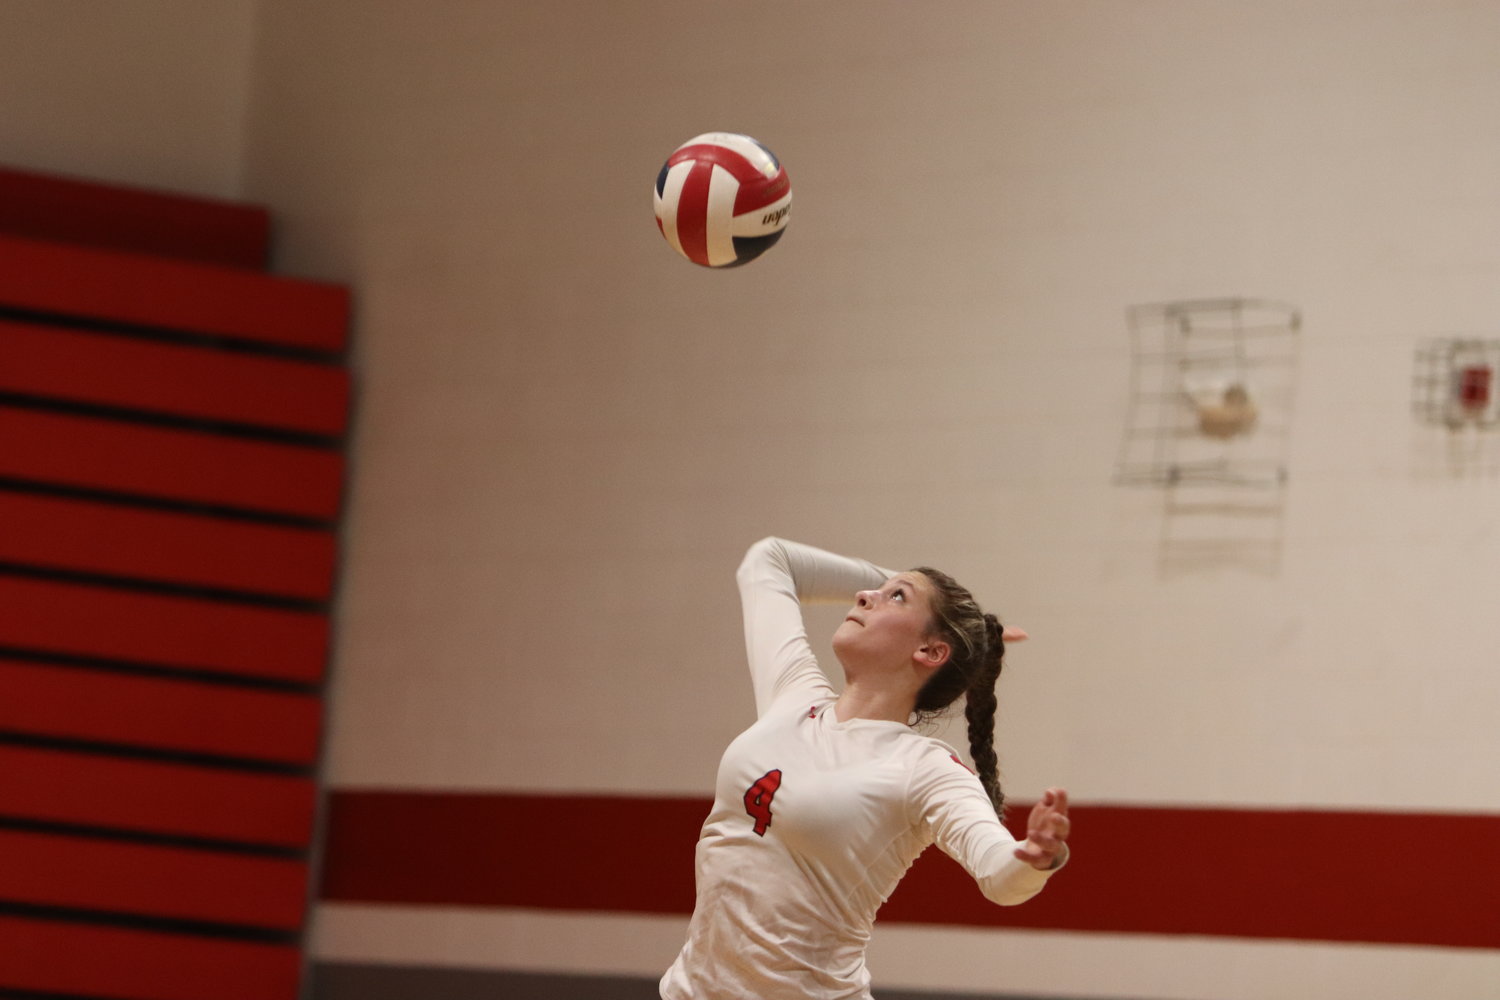 Rayne Van Reed hits a serve during a match earlier this season.